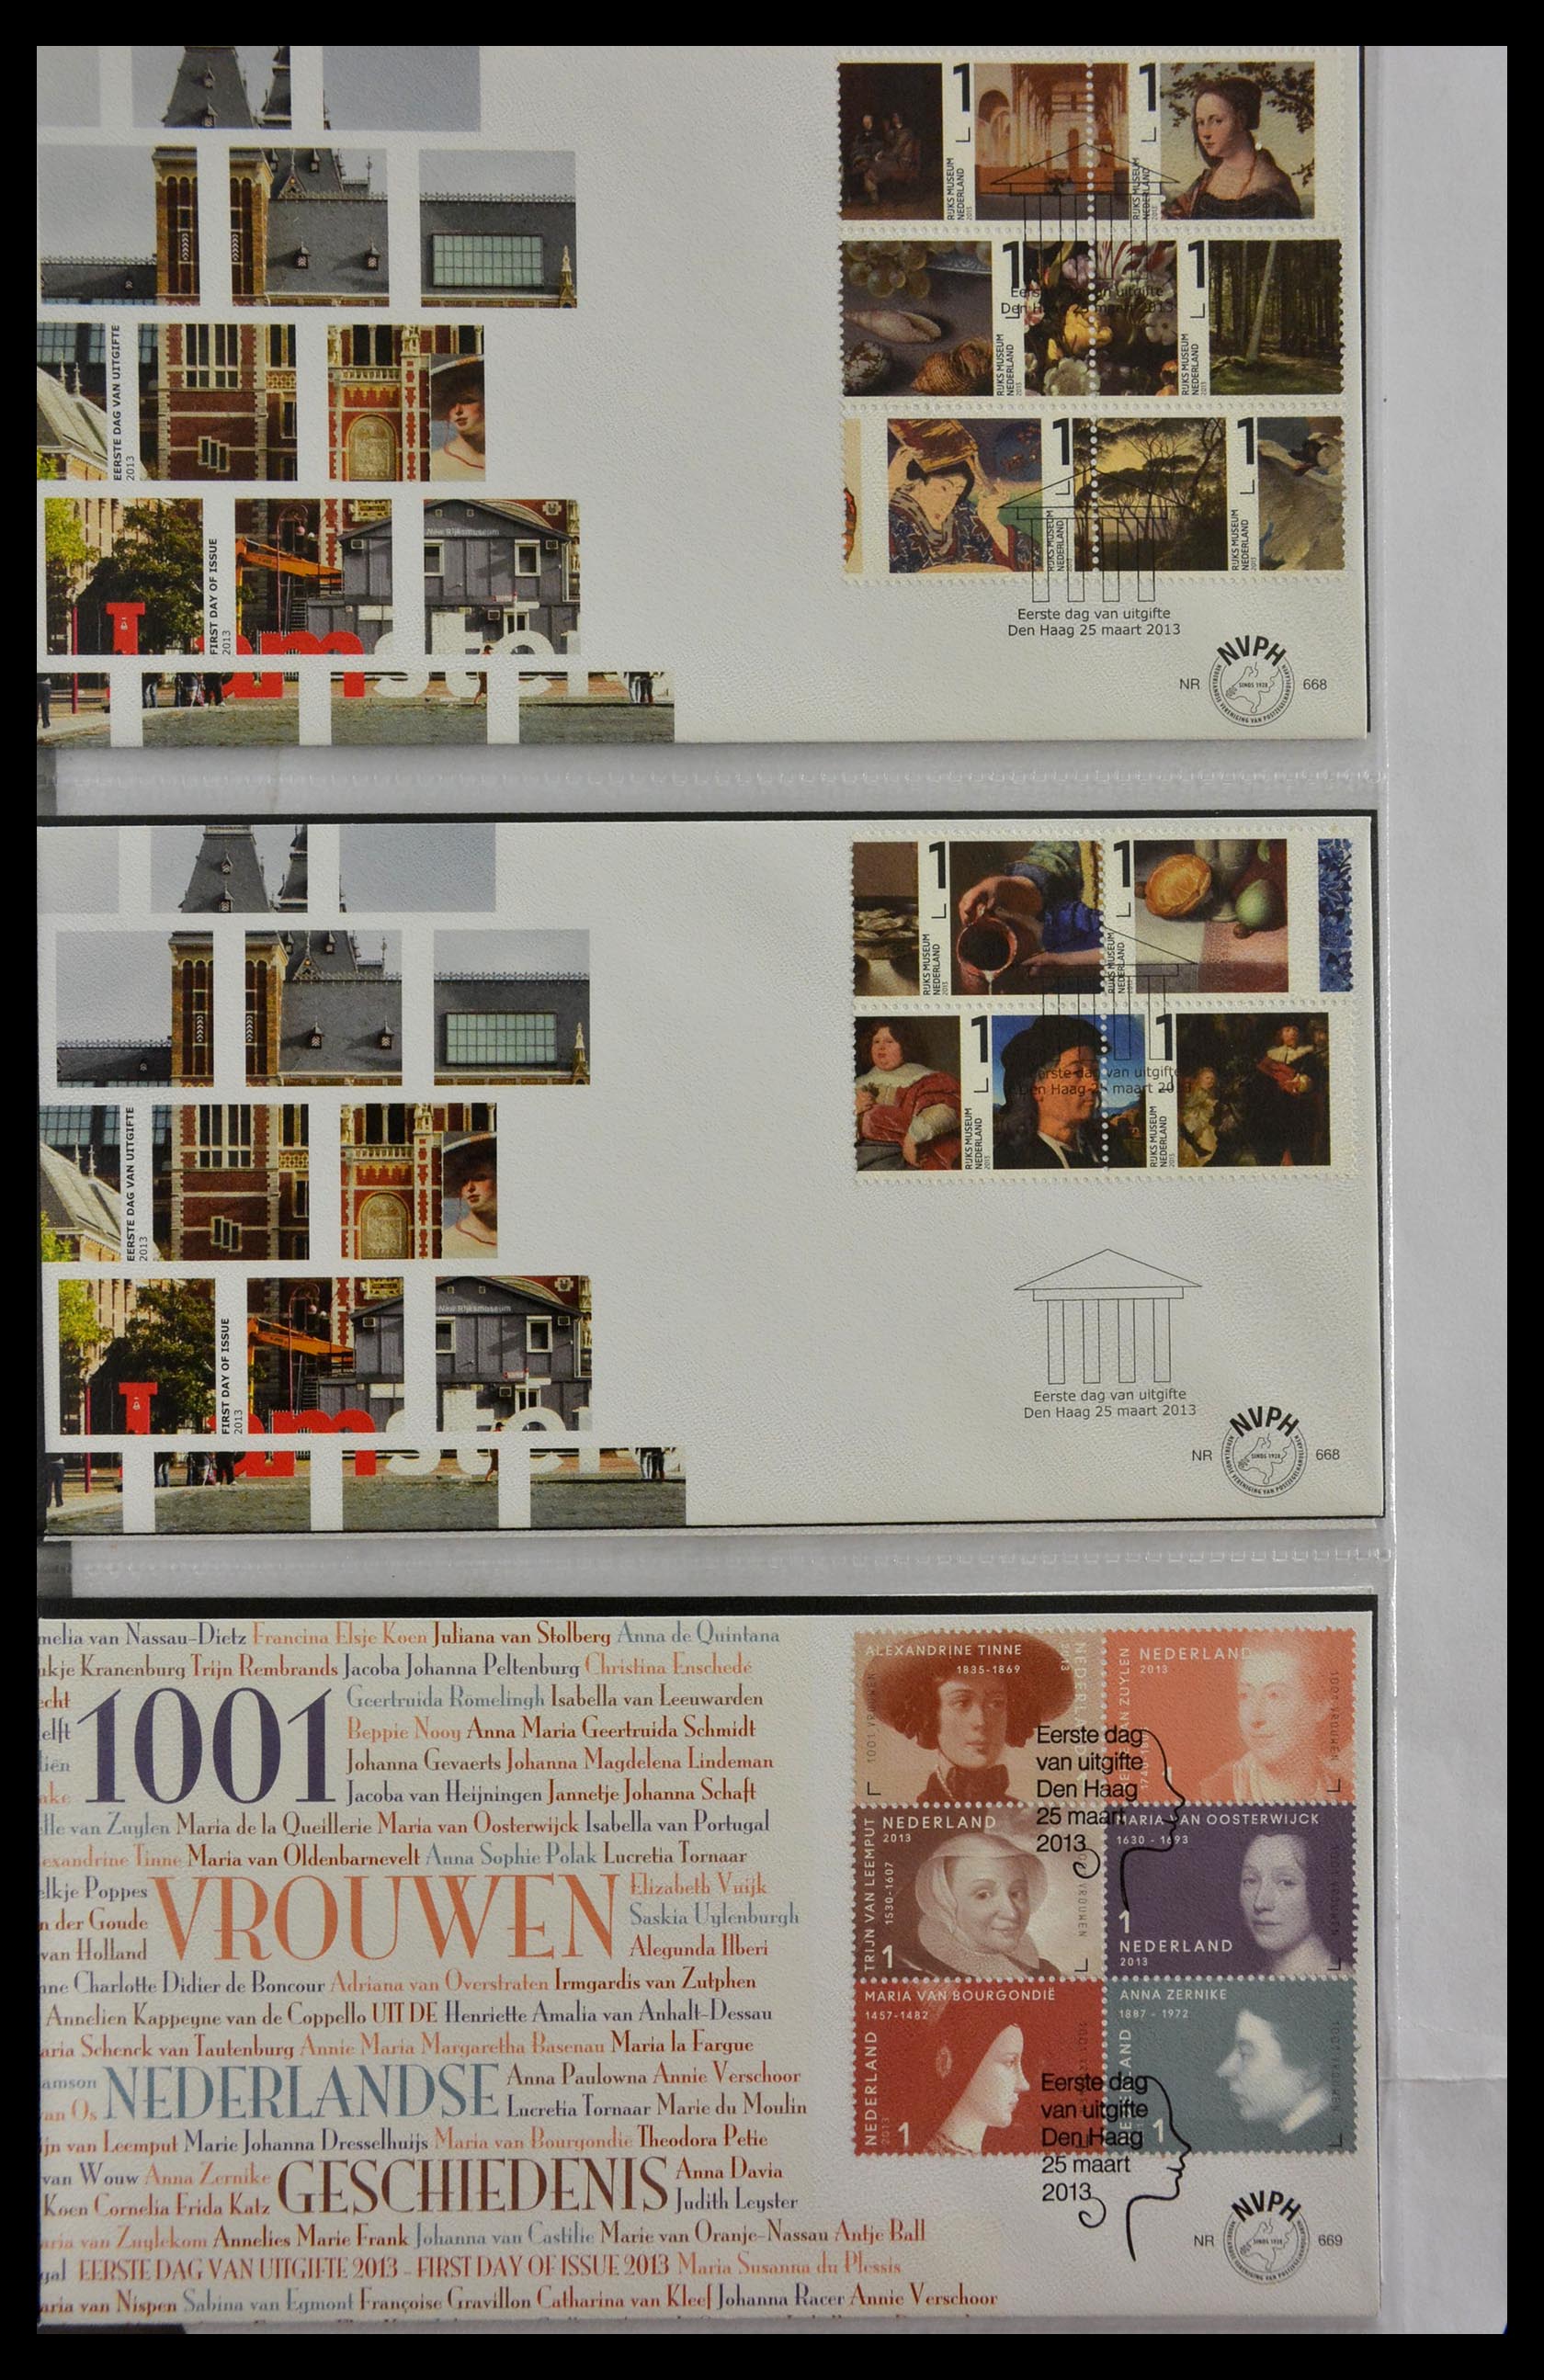 28897 106 - 28897 Netherlands 2001-2013 FDC's.